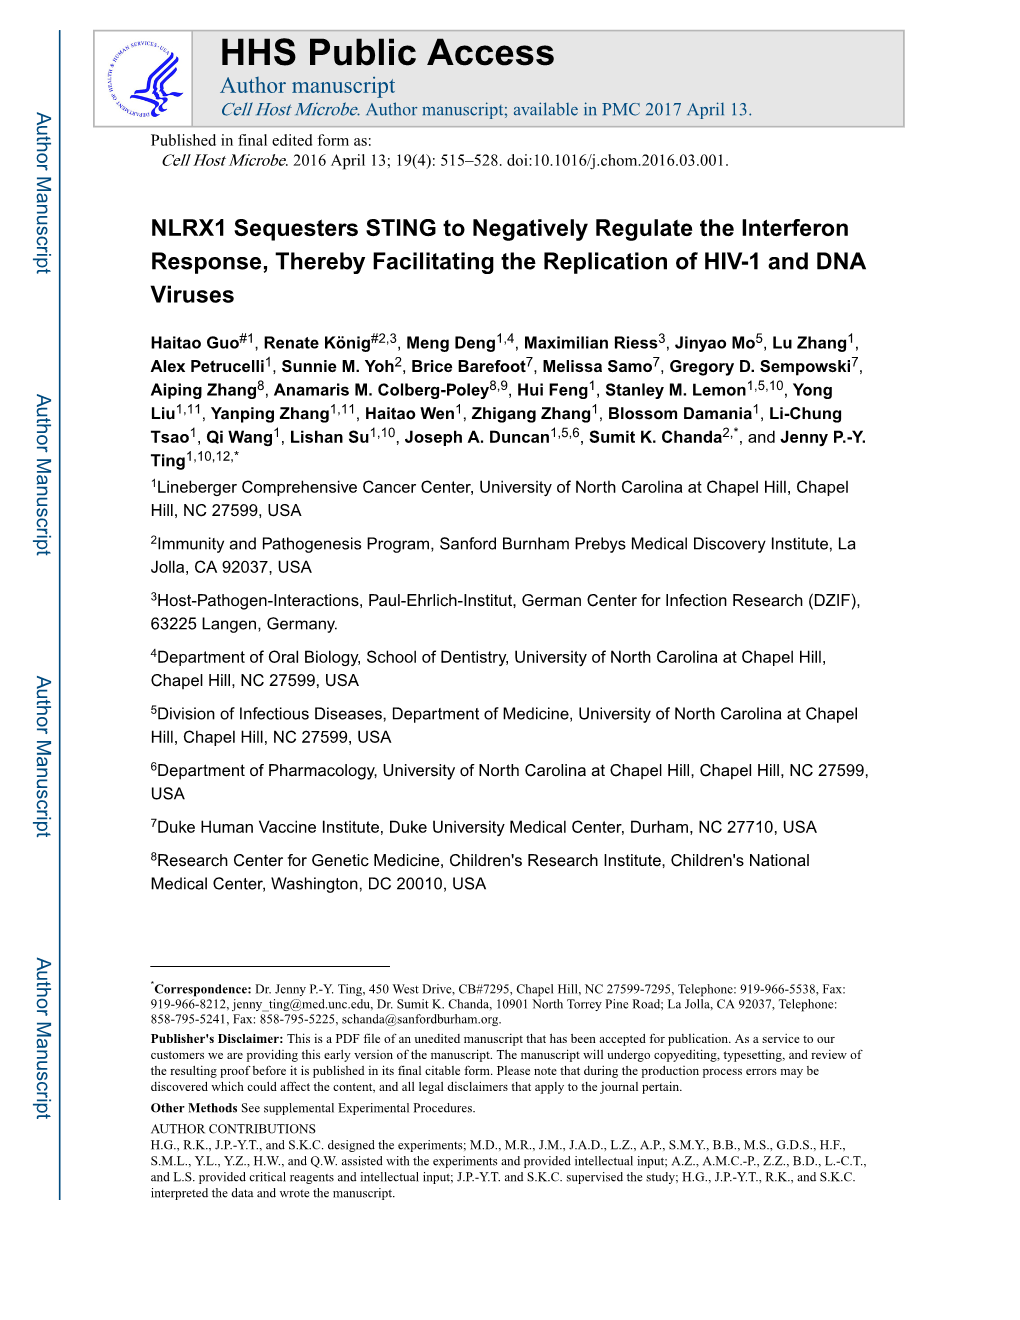 NLRX1 Sequesters STING to Negatively Regulate the Interferon Response, Thereby Facilitating the Replication of HIV-1 and DNA Viruses